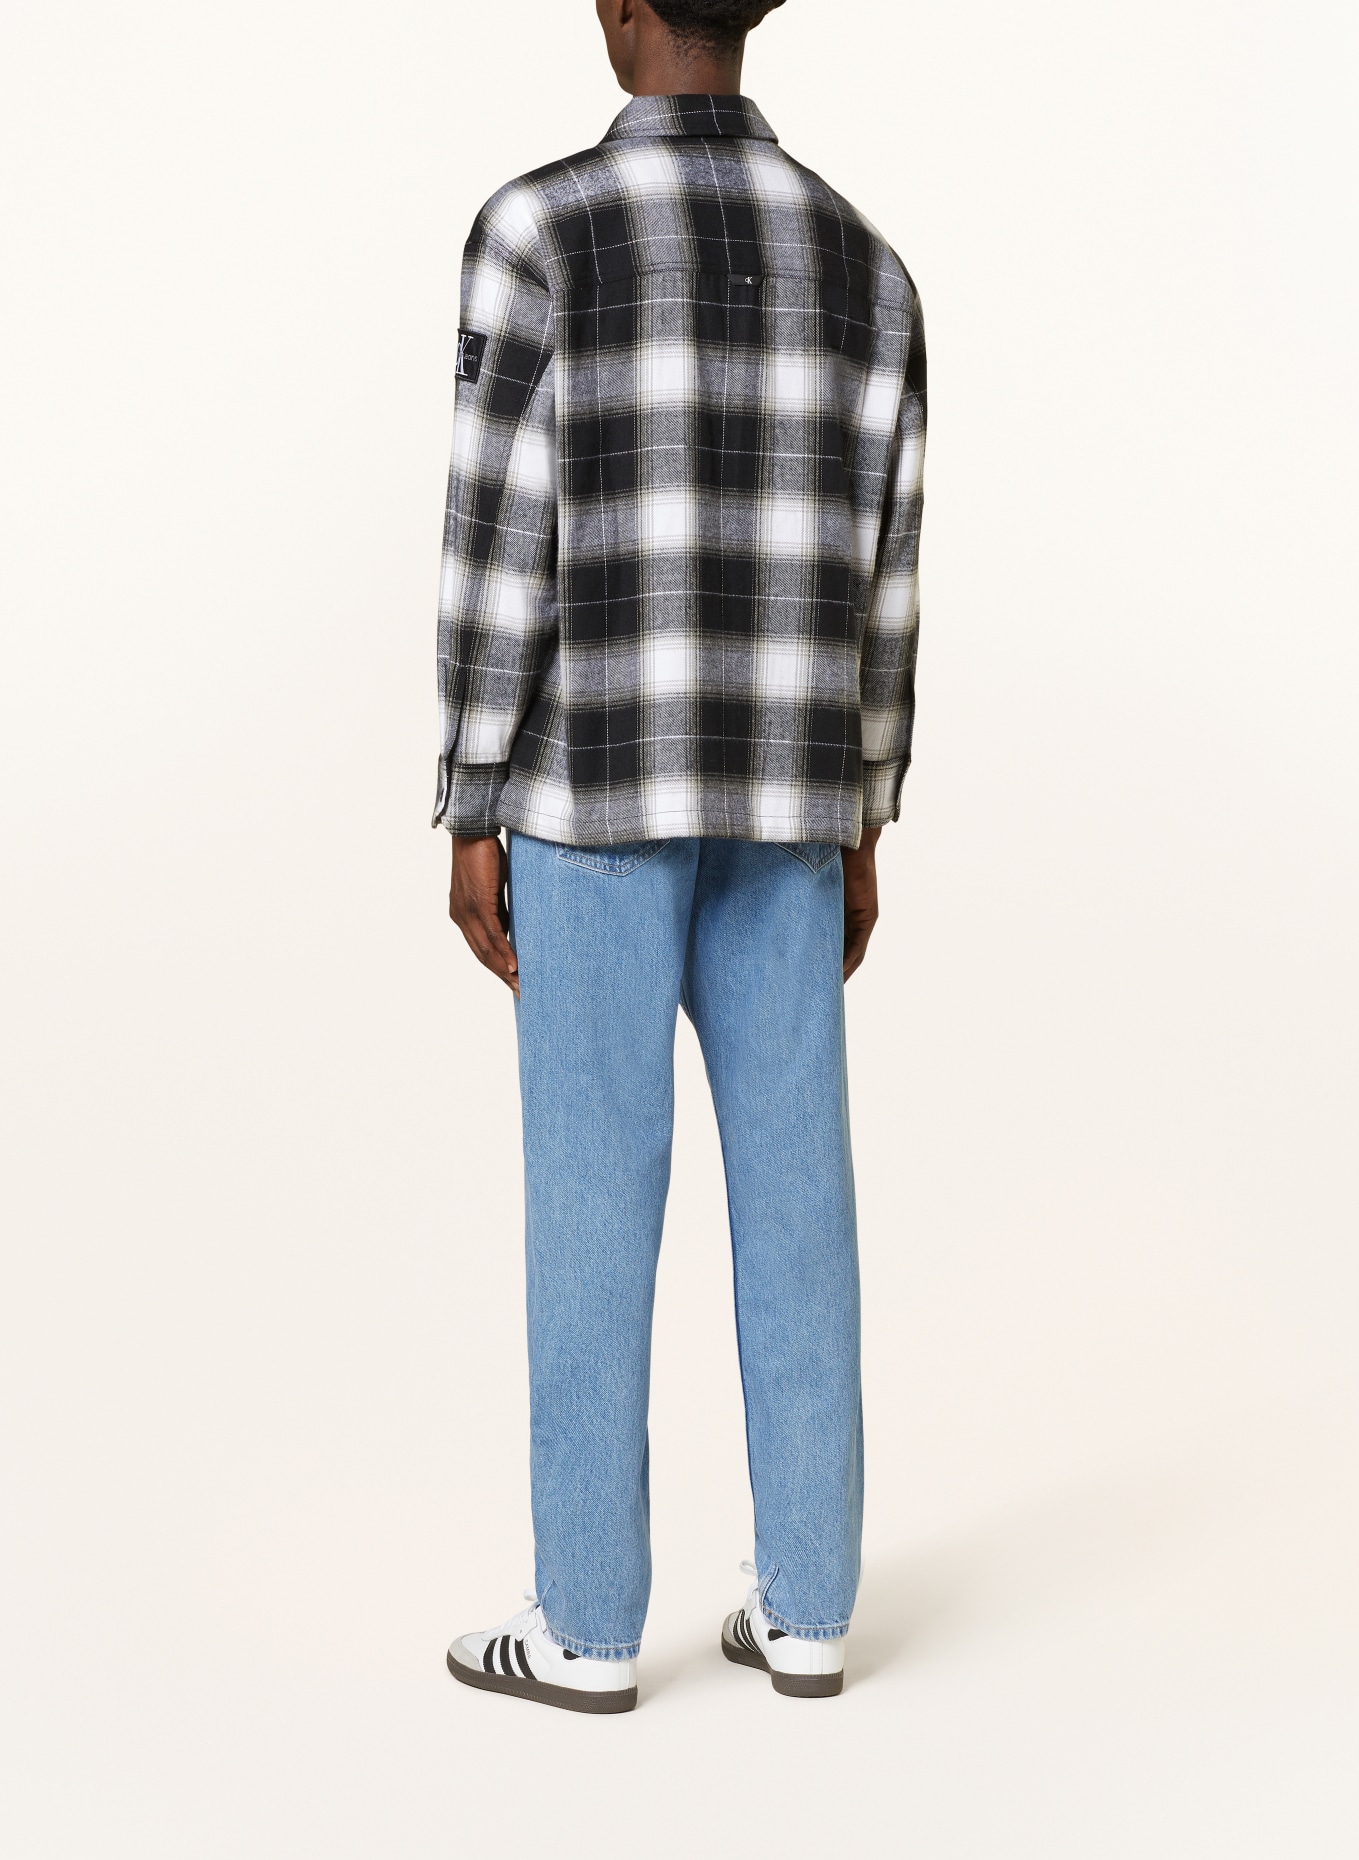 Calvin Klein Jeans Flannel overshirt, Color: BLACK/ WHITE/ GRAY (Image 3)